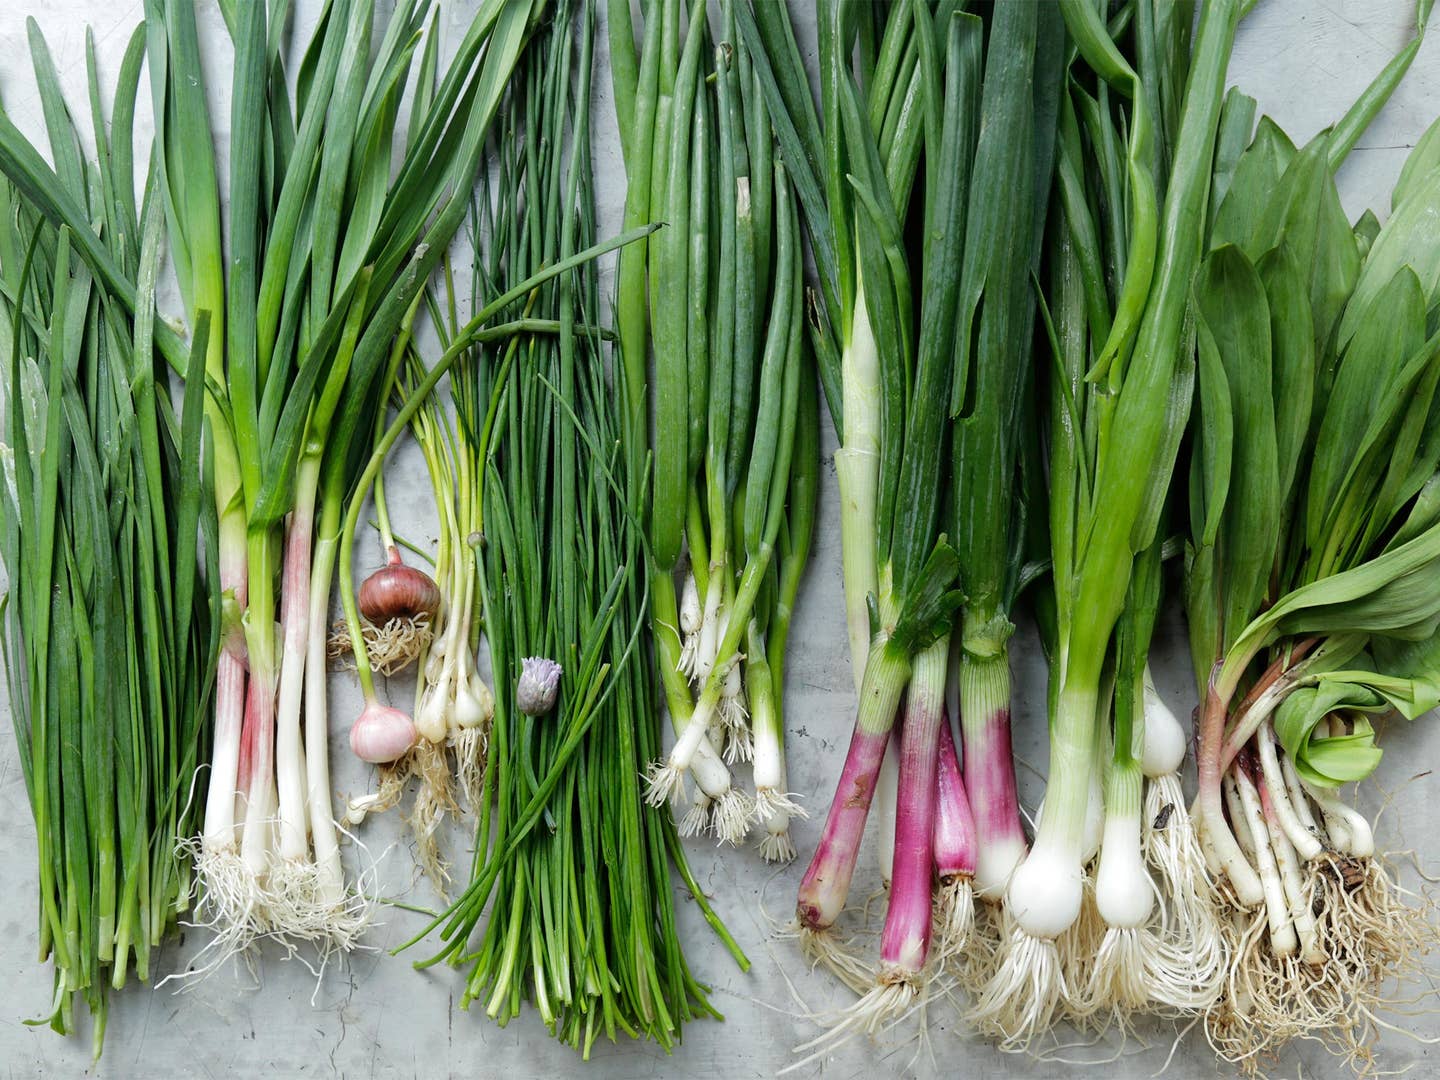 A Beginner’s Guide to Spring Alliums, the Best Early Taste of Spring